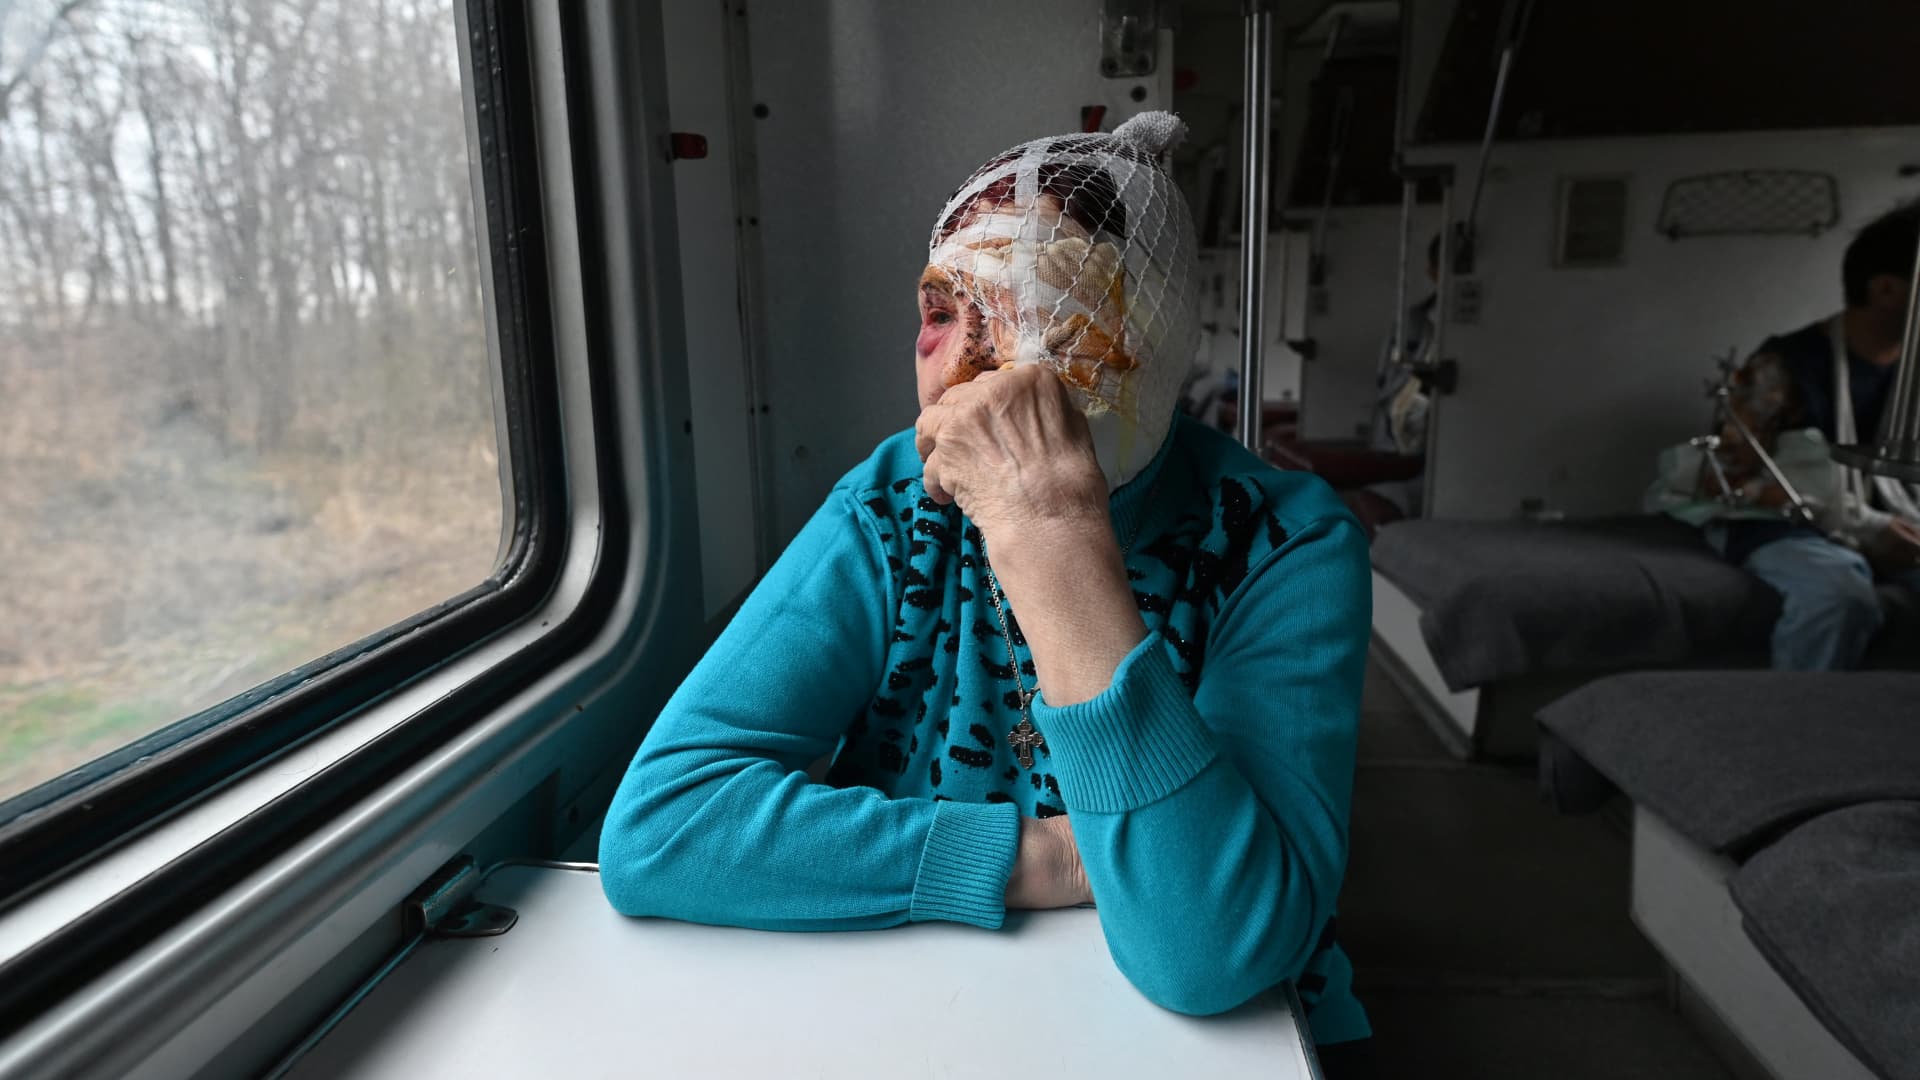 Praskovya, 77, watches out of a window of a medical evacuation train on its way to the western Ukrainian city of Lviv on April 10, 2022.